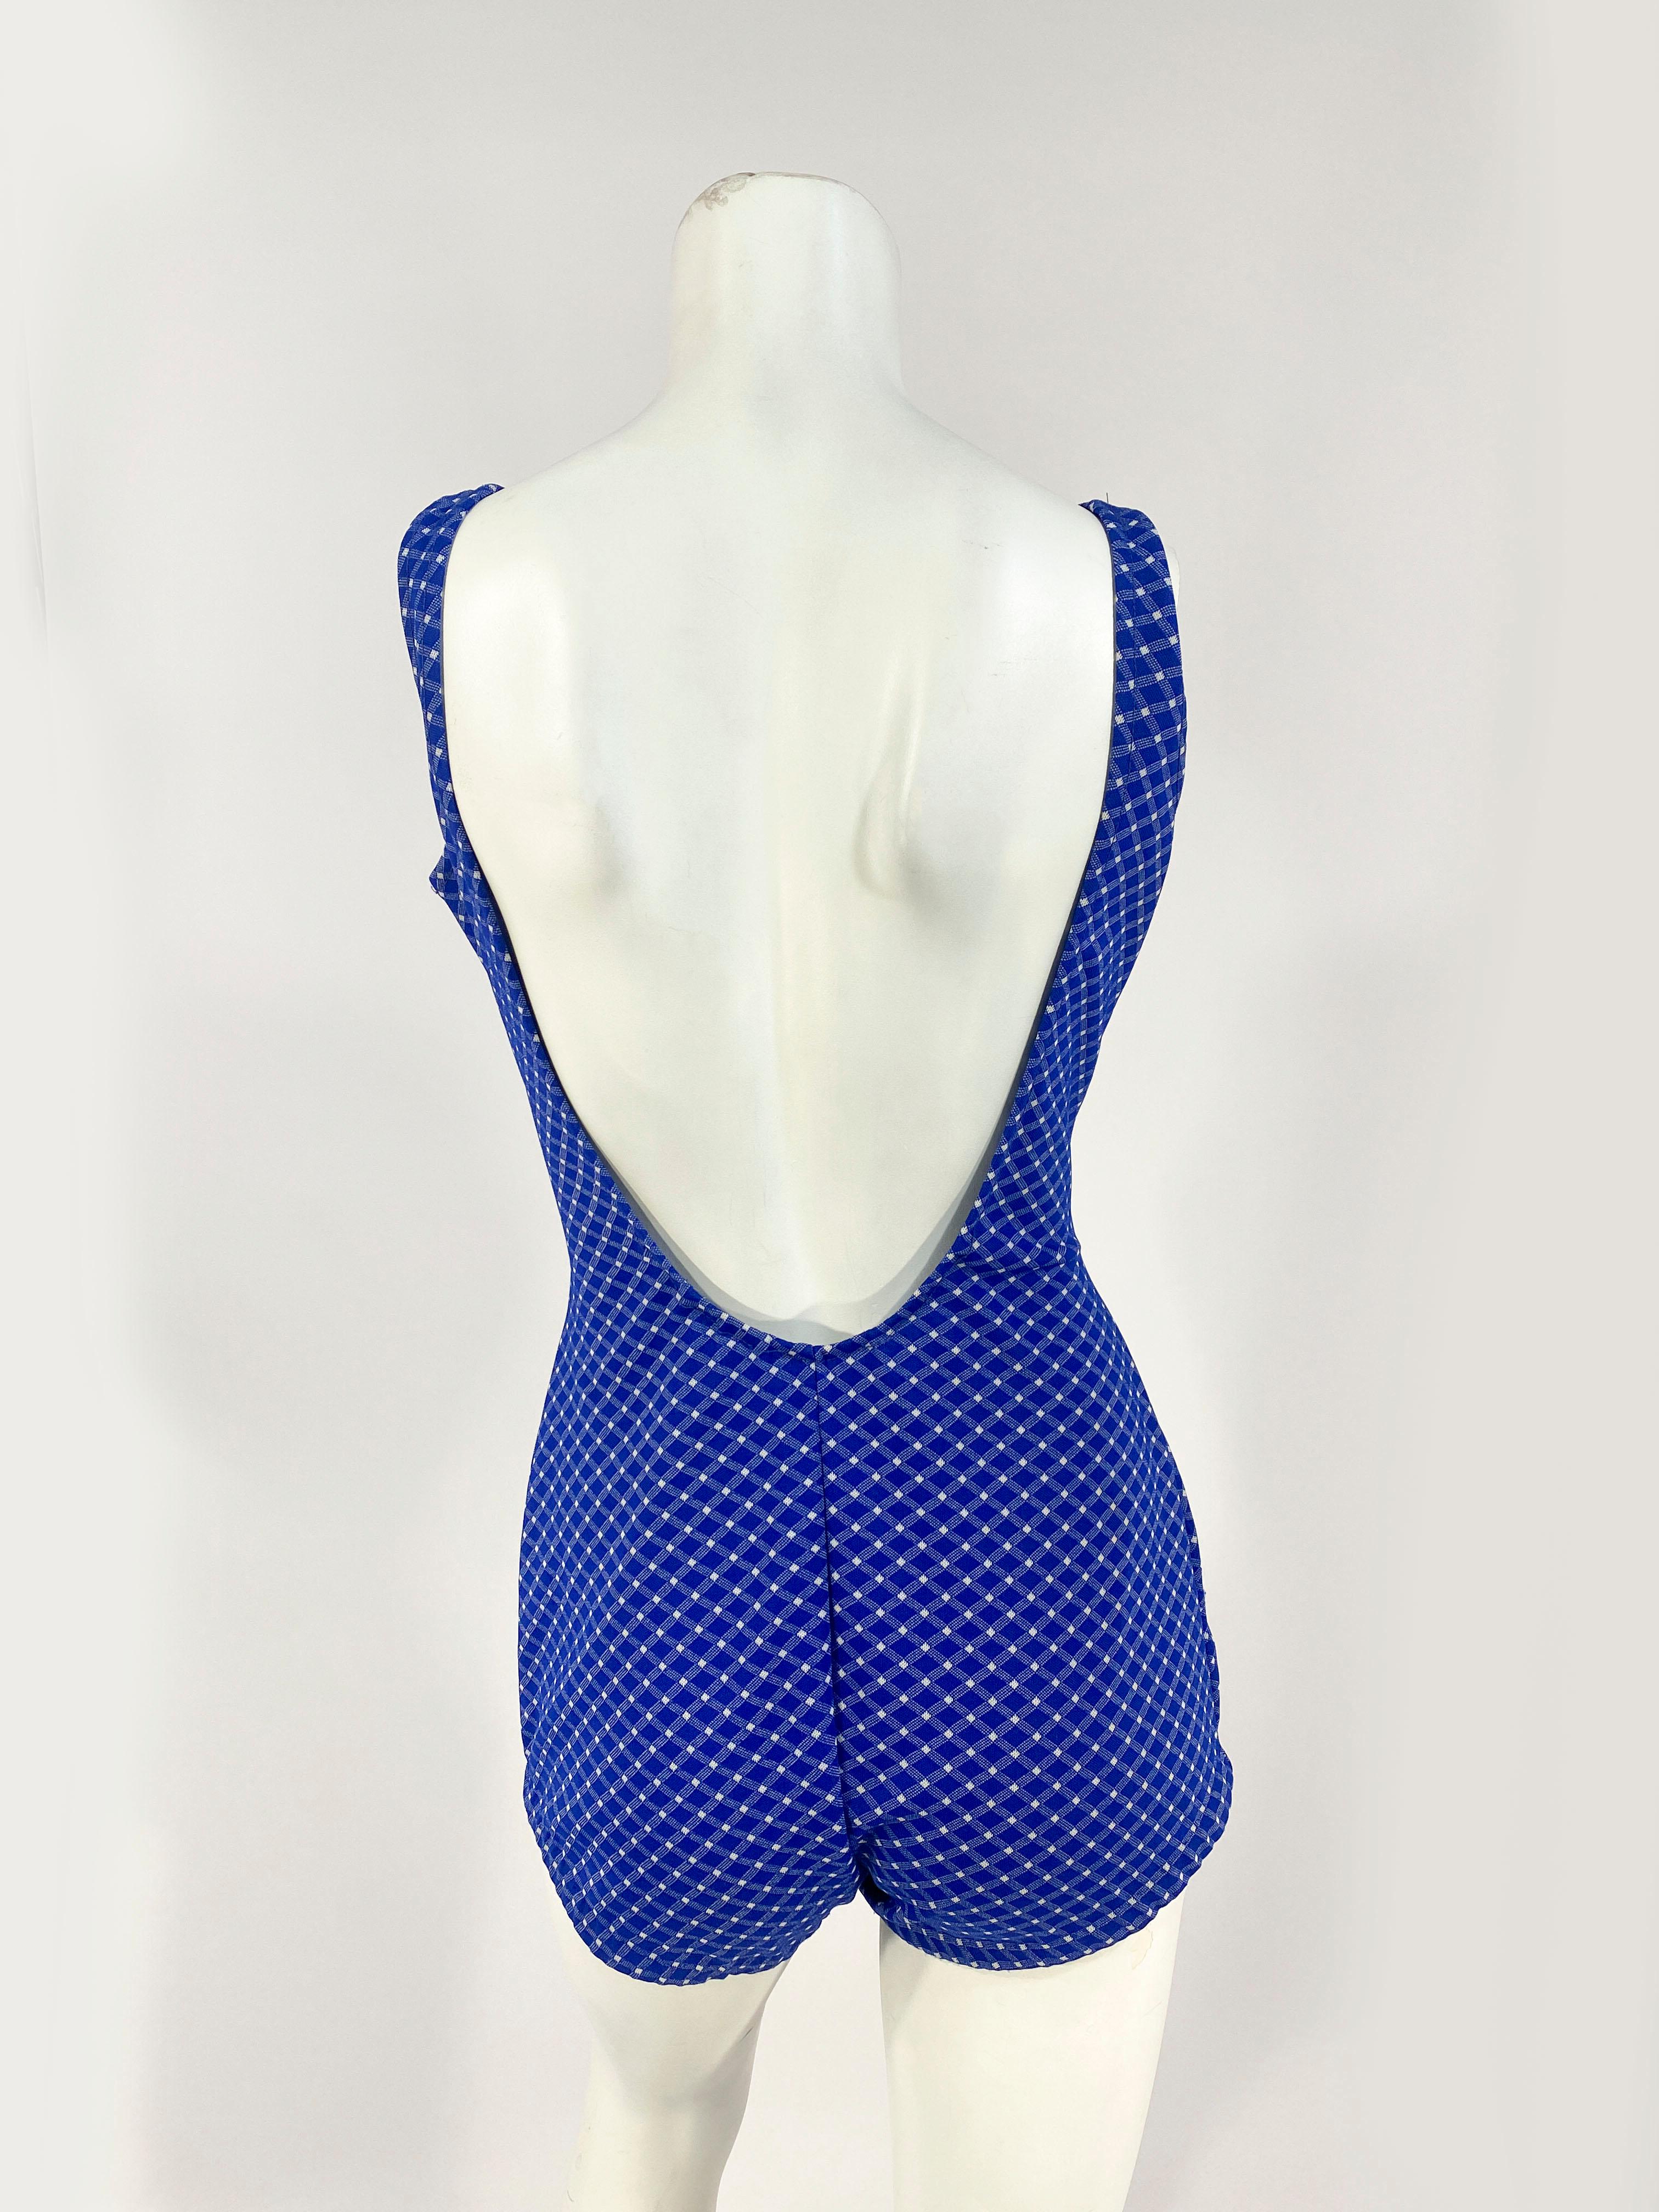 Women's 1960s Blue and White Gingham Pattern Bathing Suit